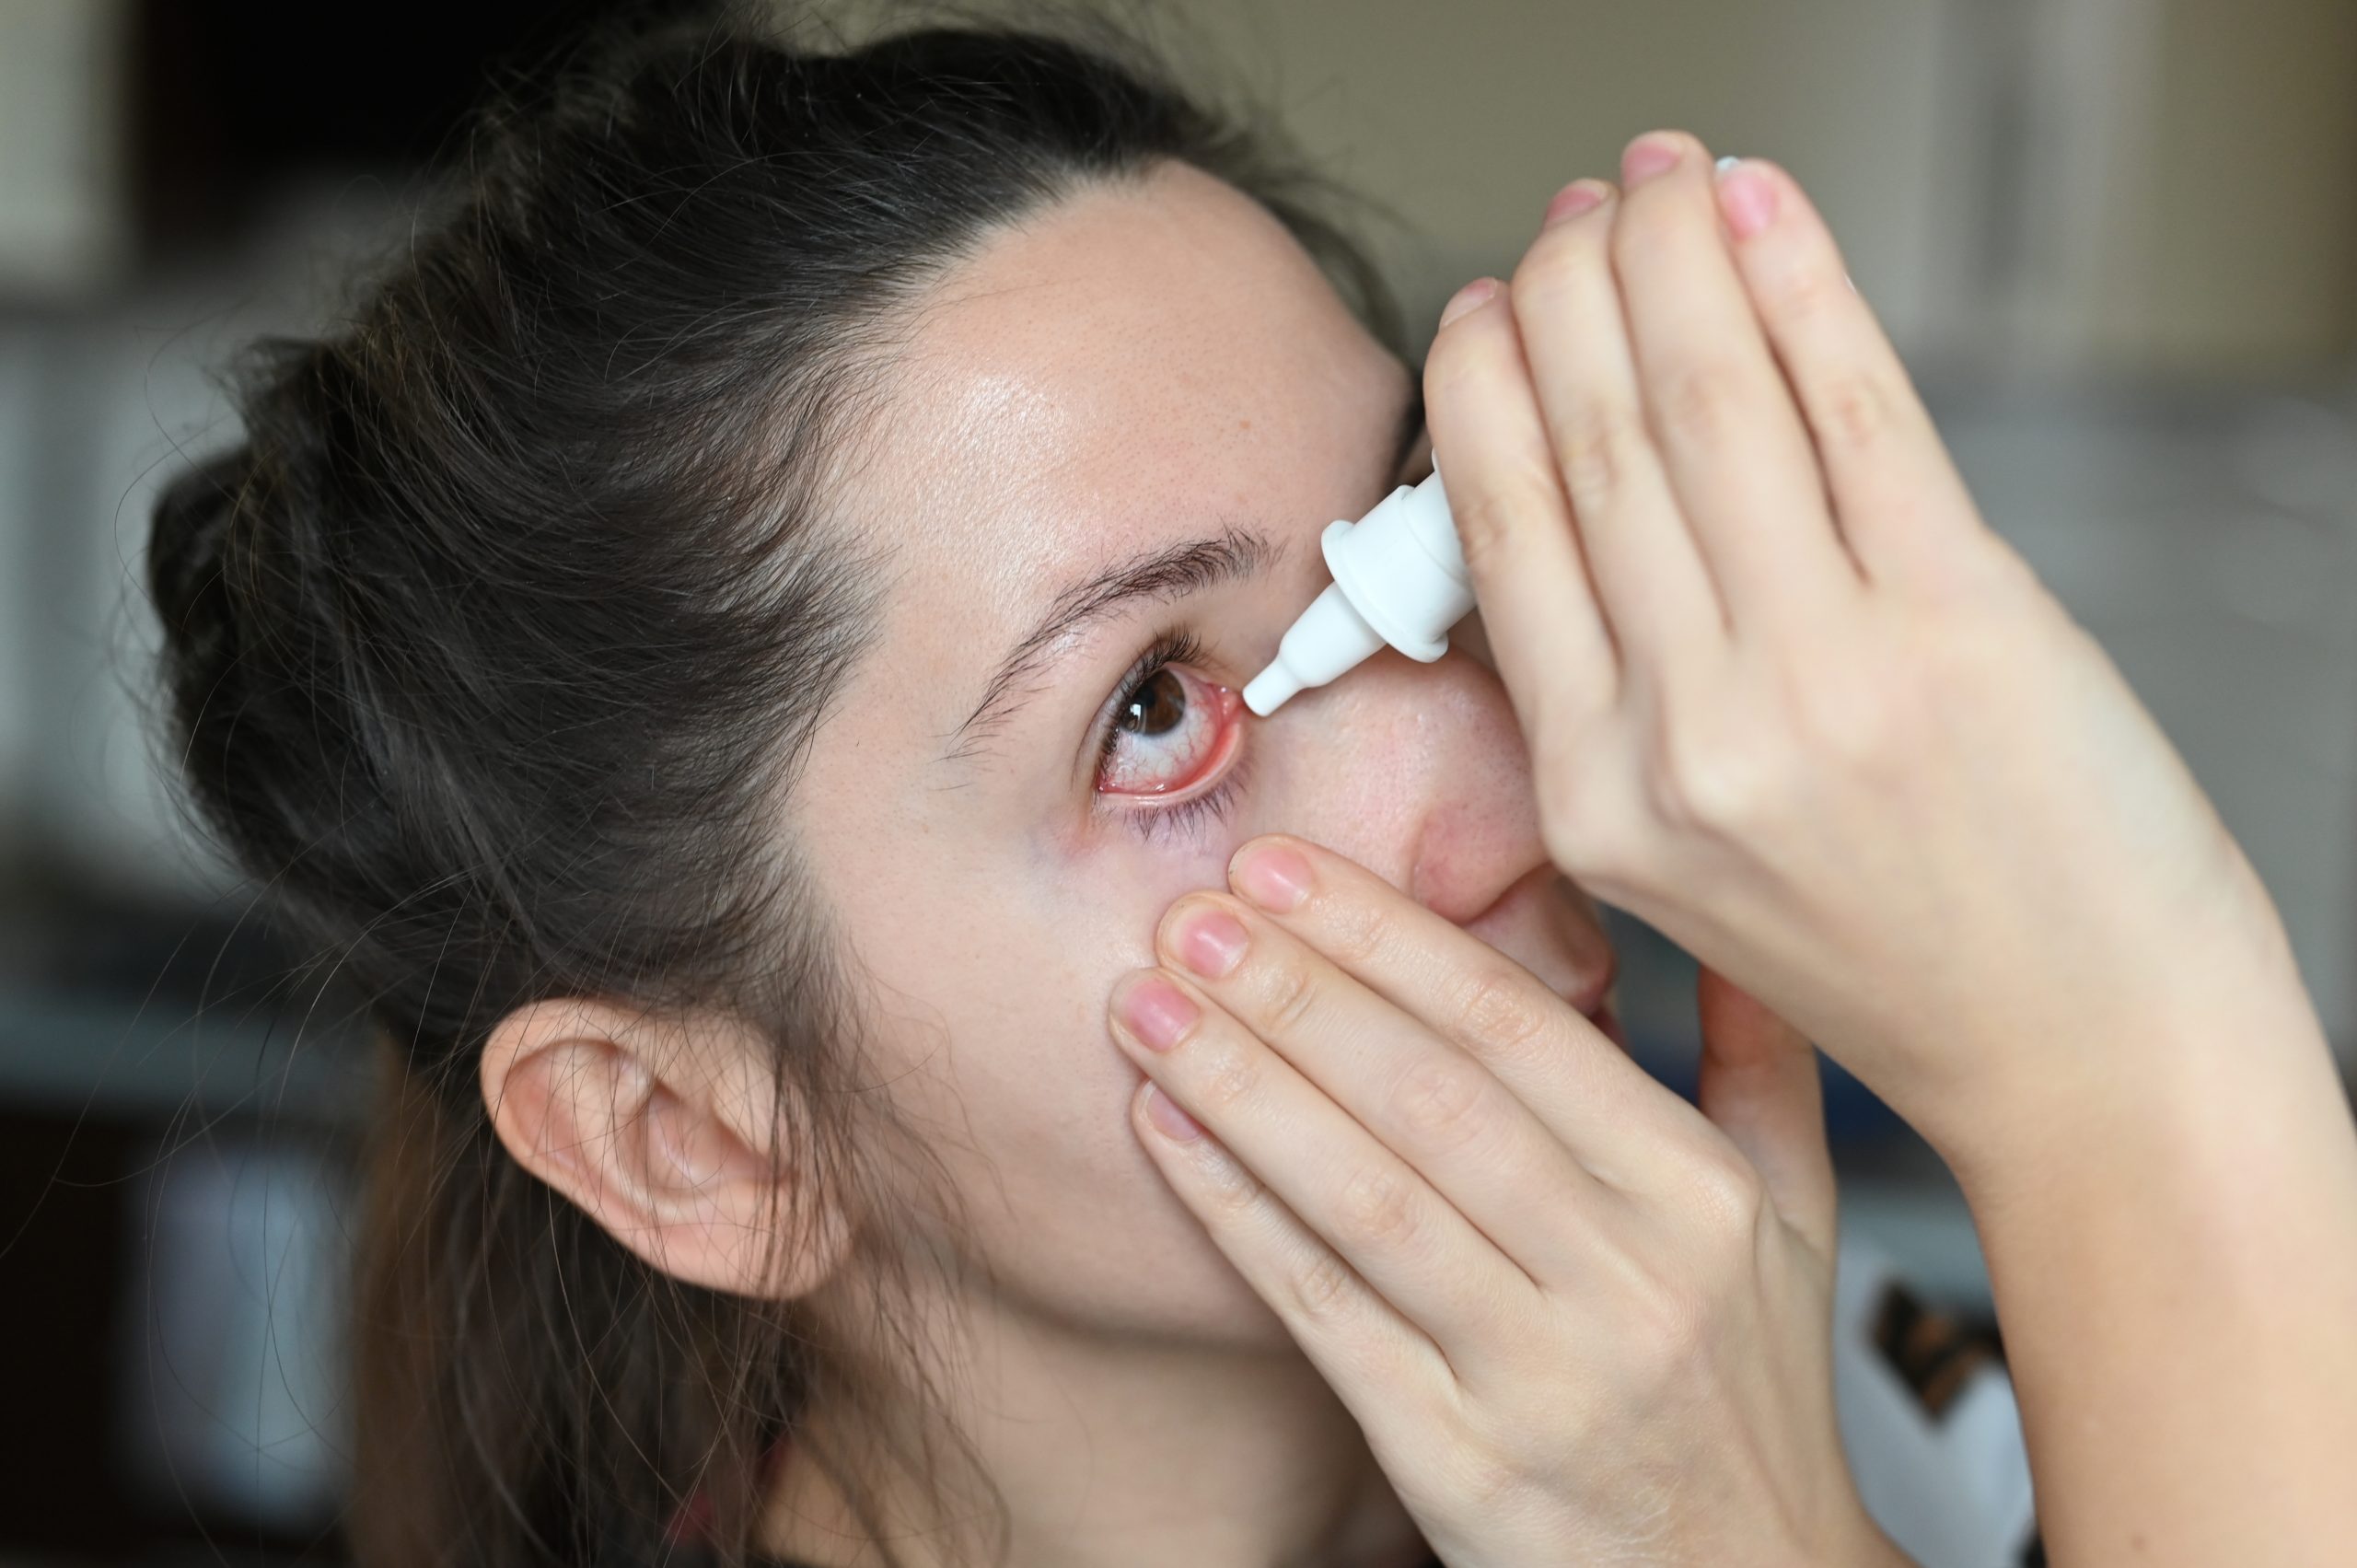 What To Do When You Have An Acute Infection To The Eye